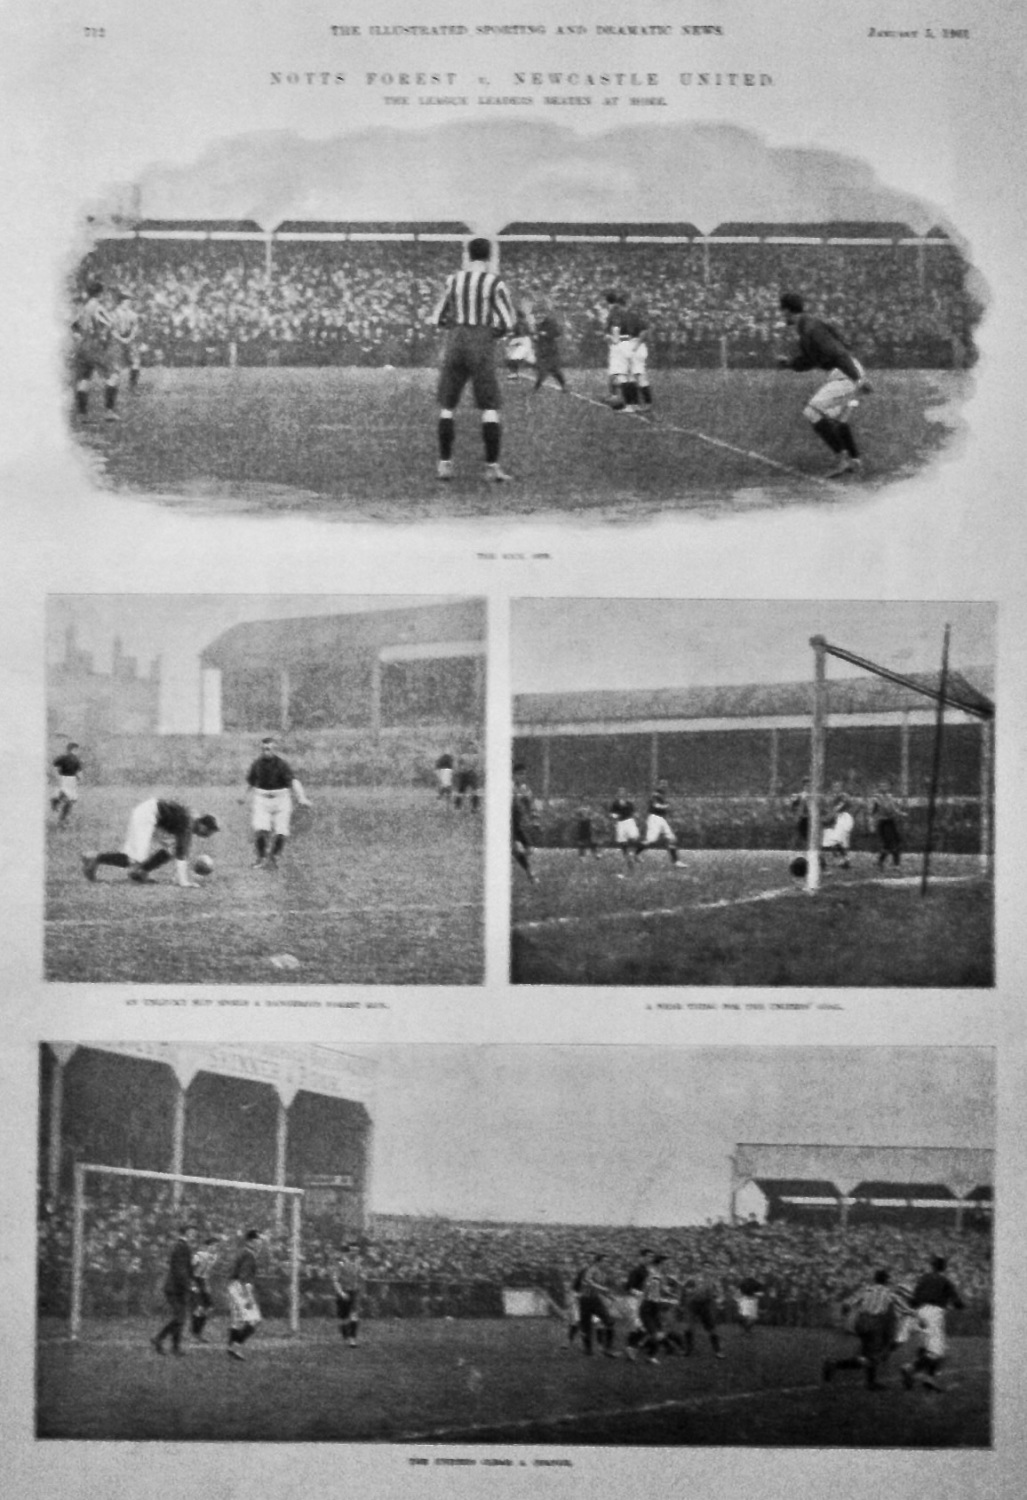 Notts Forest v. Newcastle United :  The League leaders beaten at Home.  190